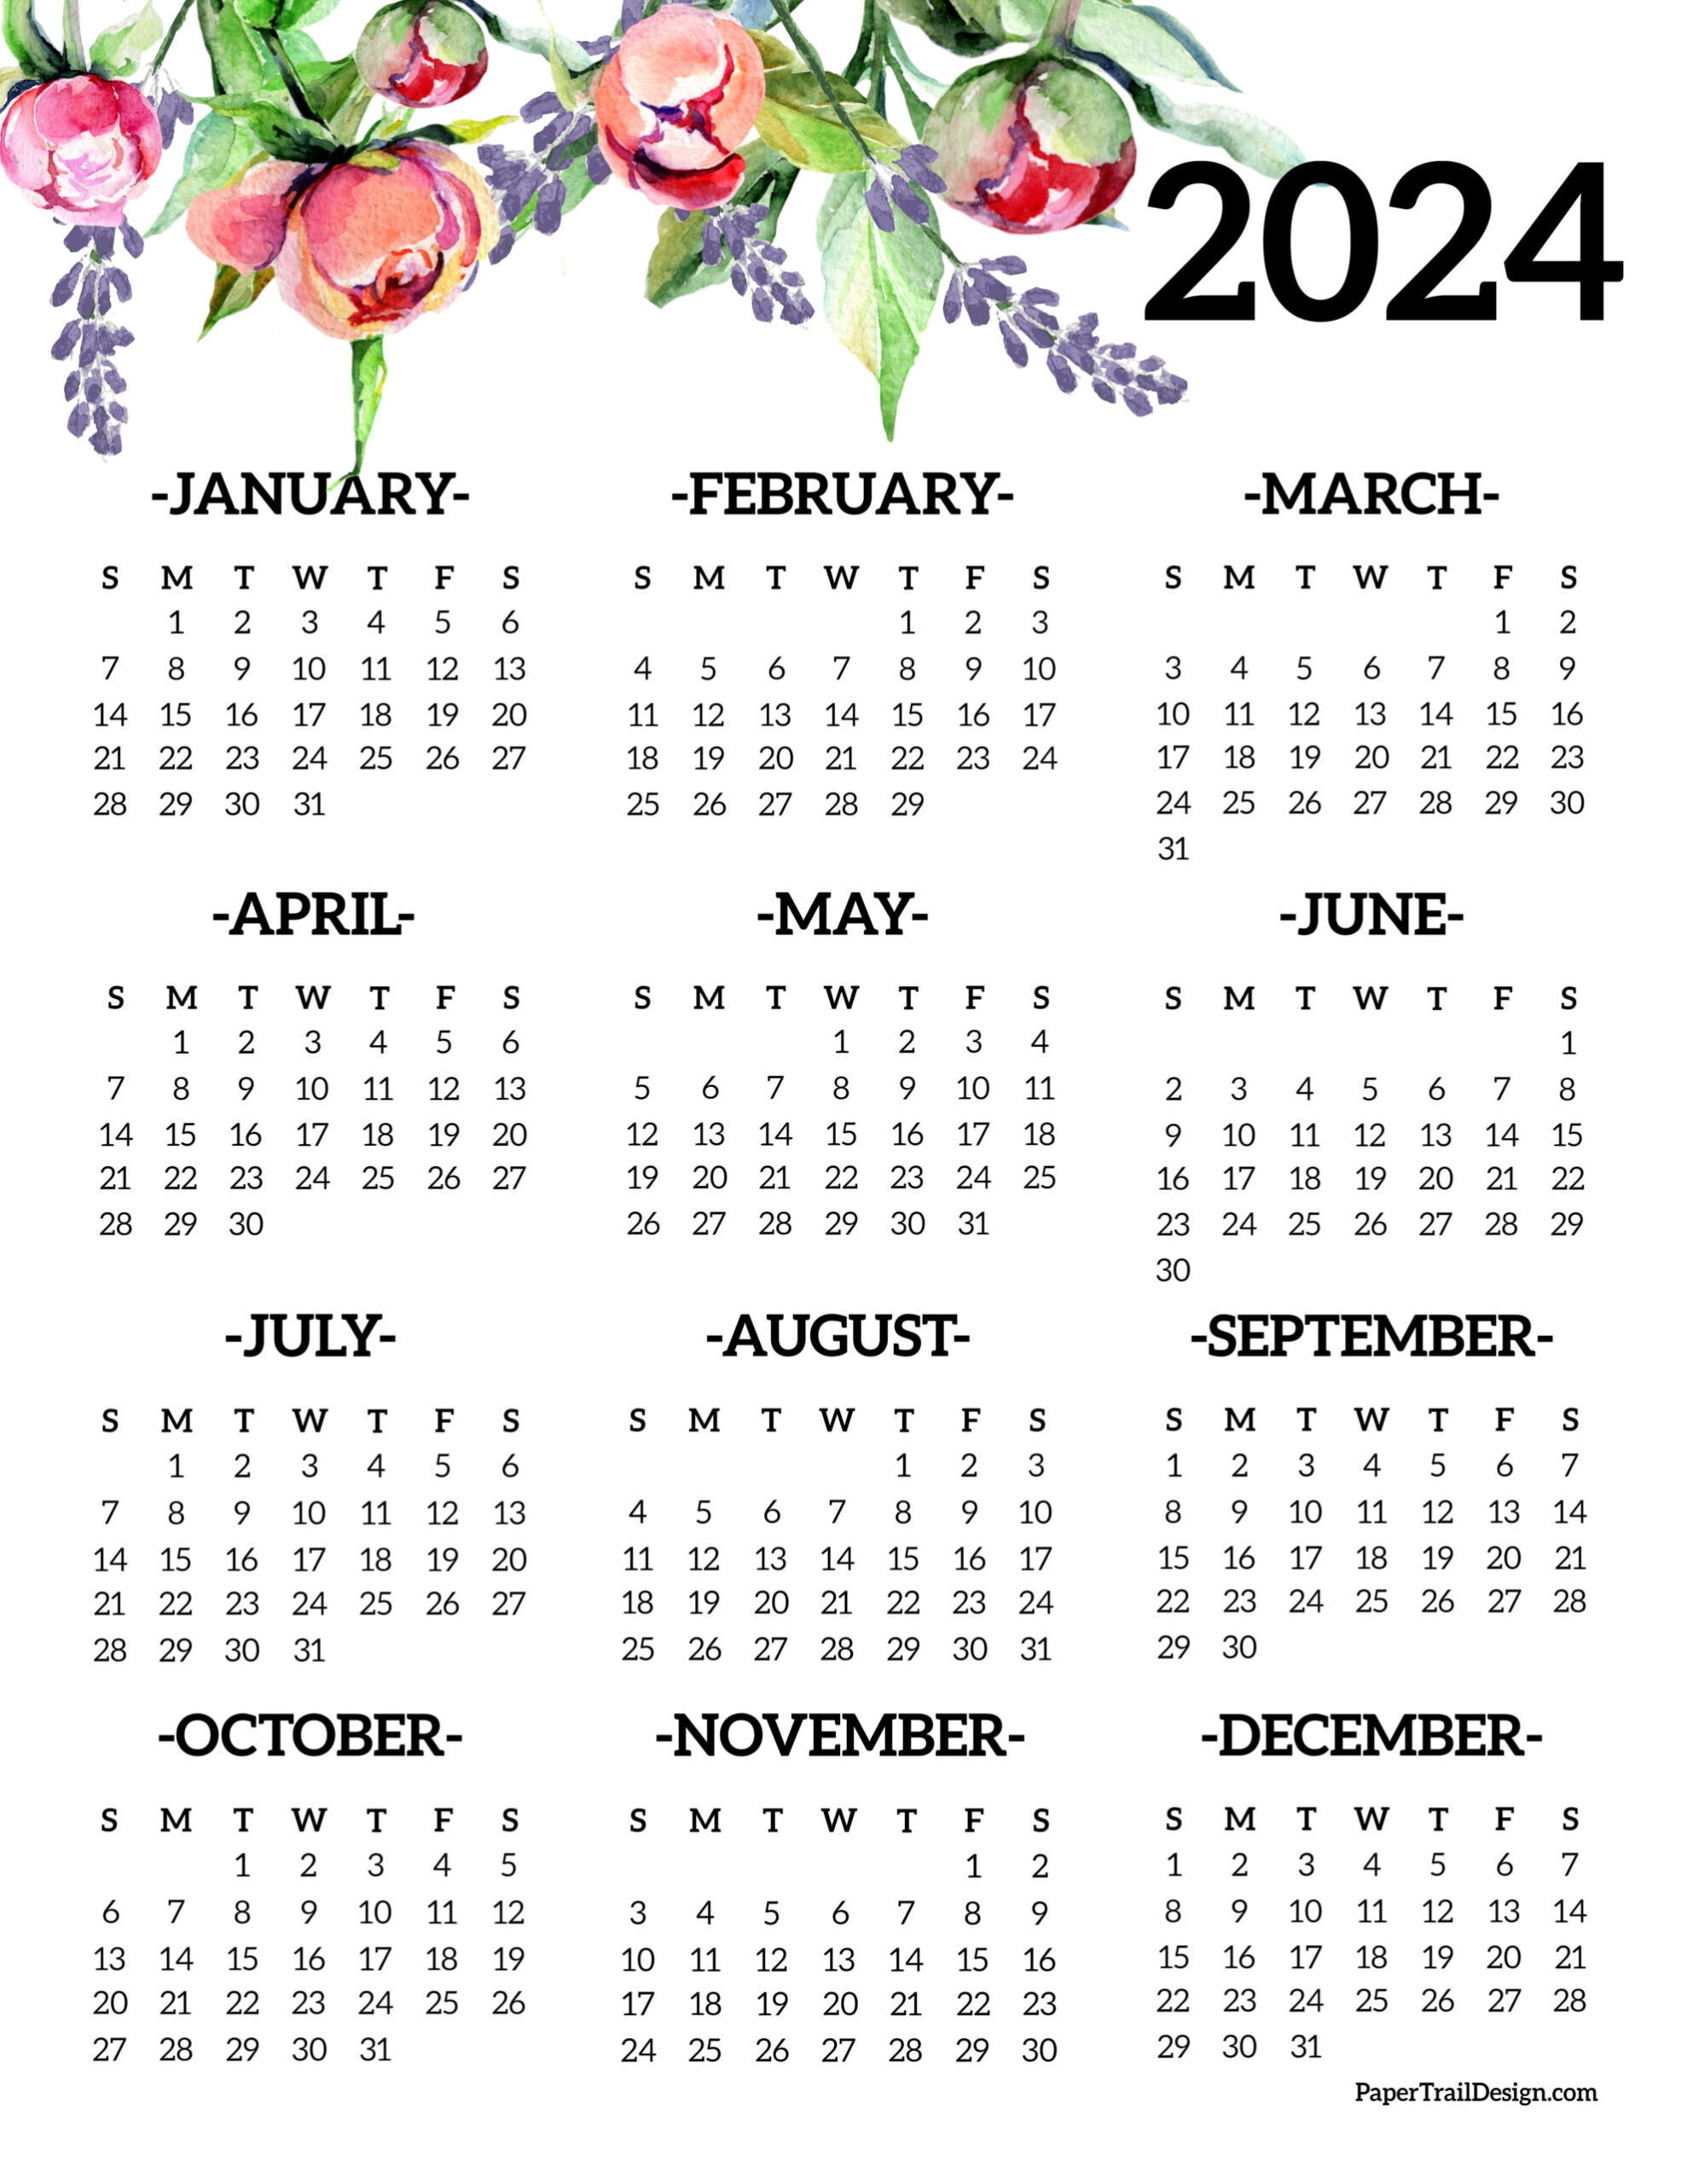 Calendar 2024 Printable One Page - Paper Trail Design | One Page Printable Calendar 2024